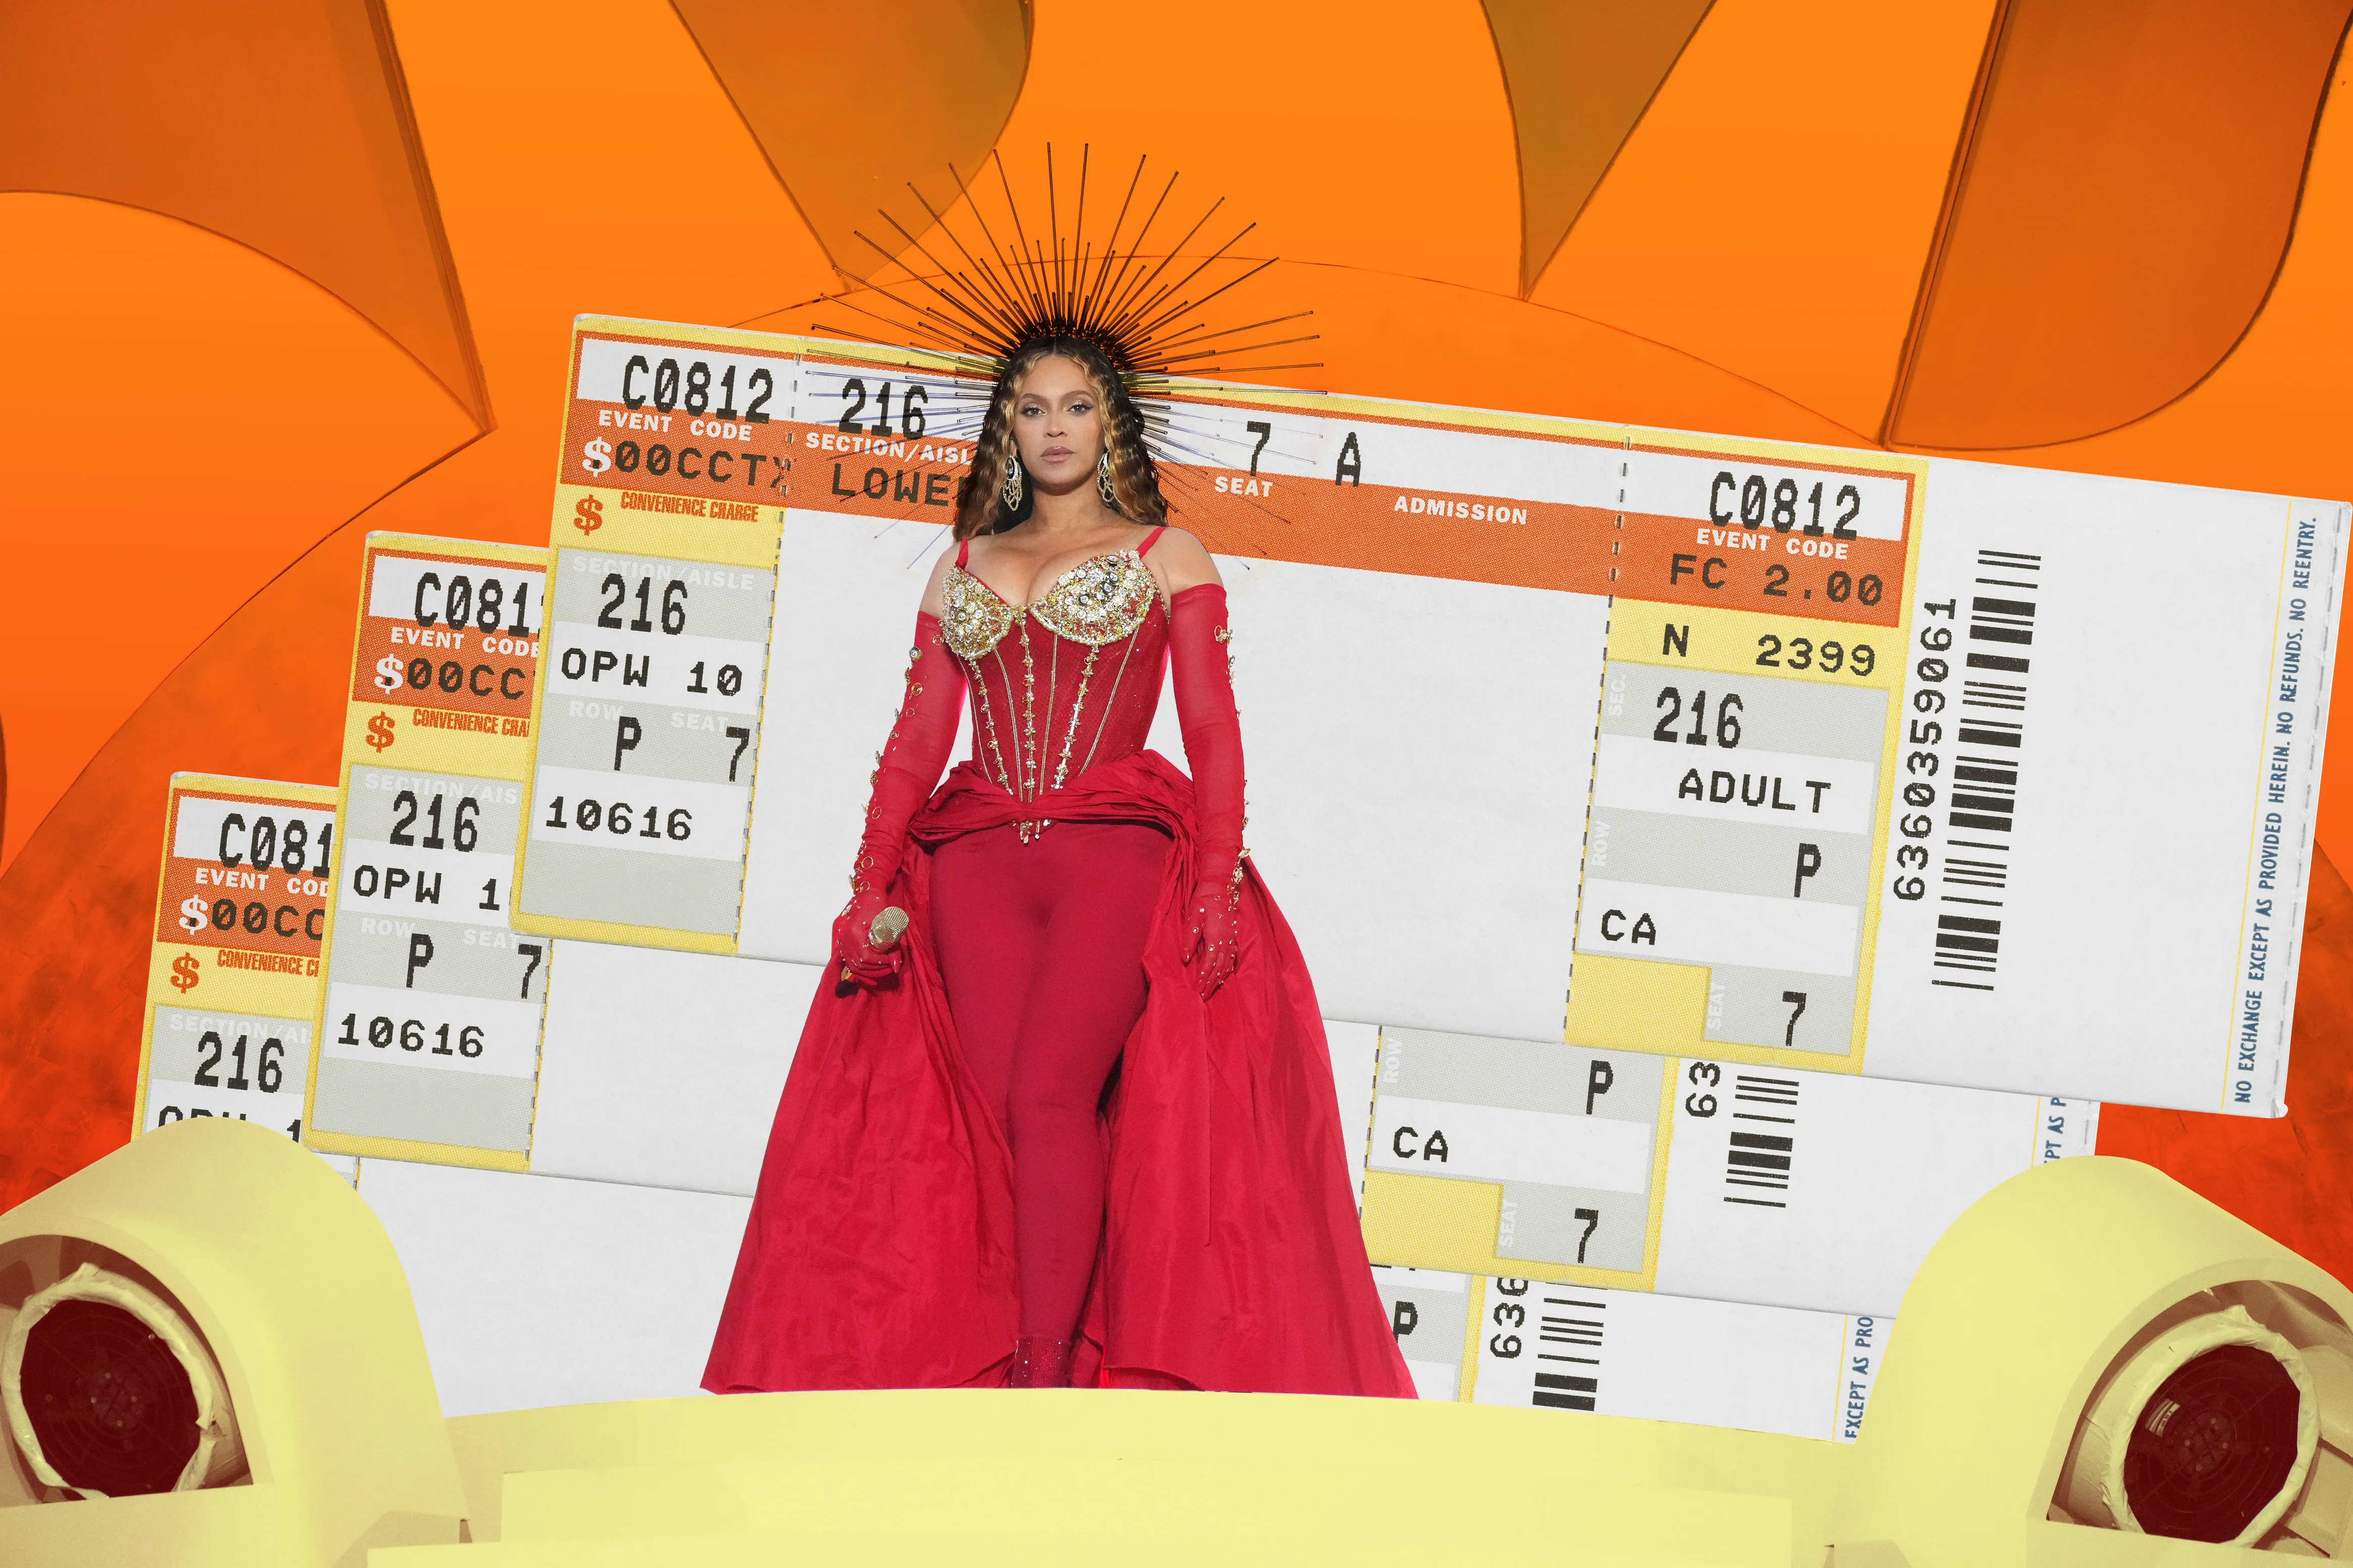 Beyonce Is Going on Tour — Here’s How to Prepare for the Ticket-Buying Frenzy